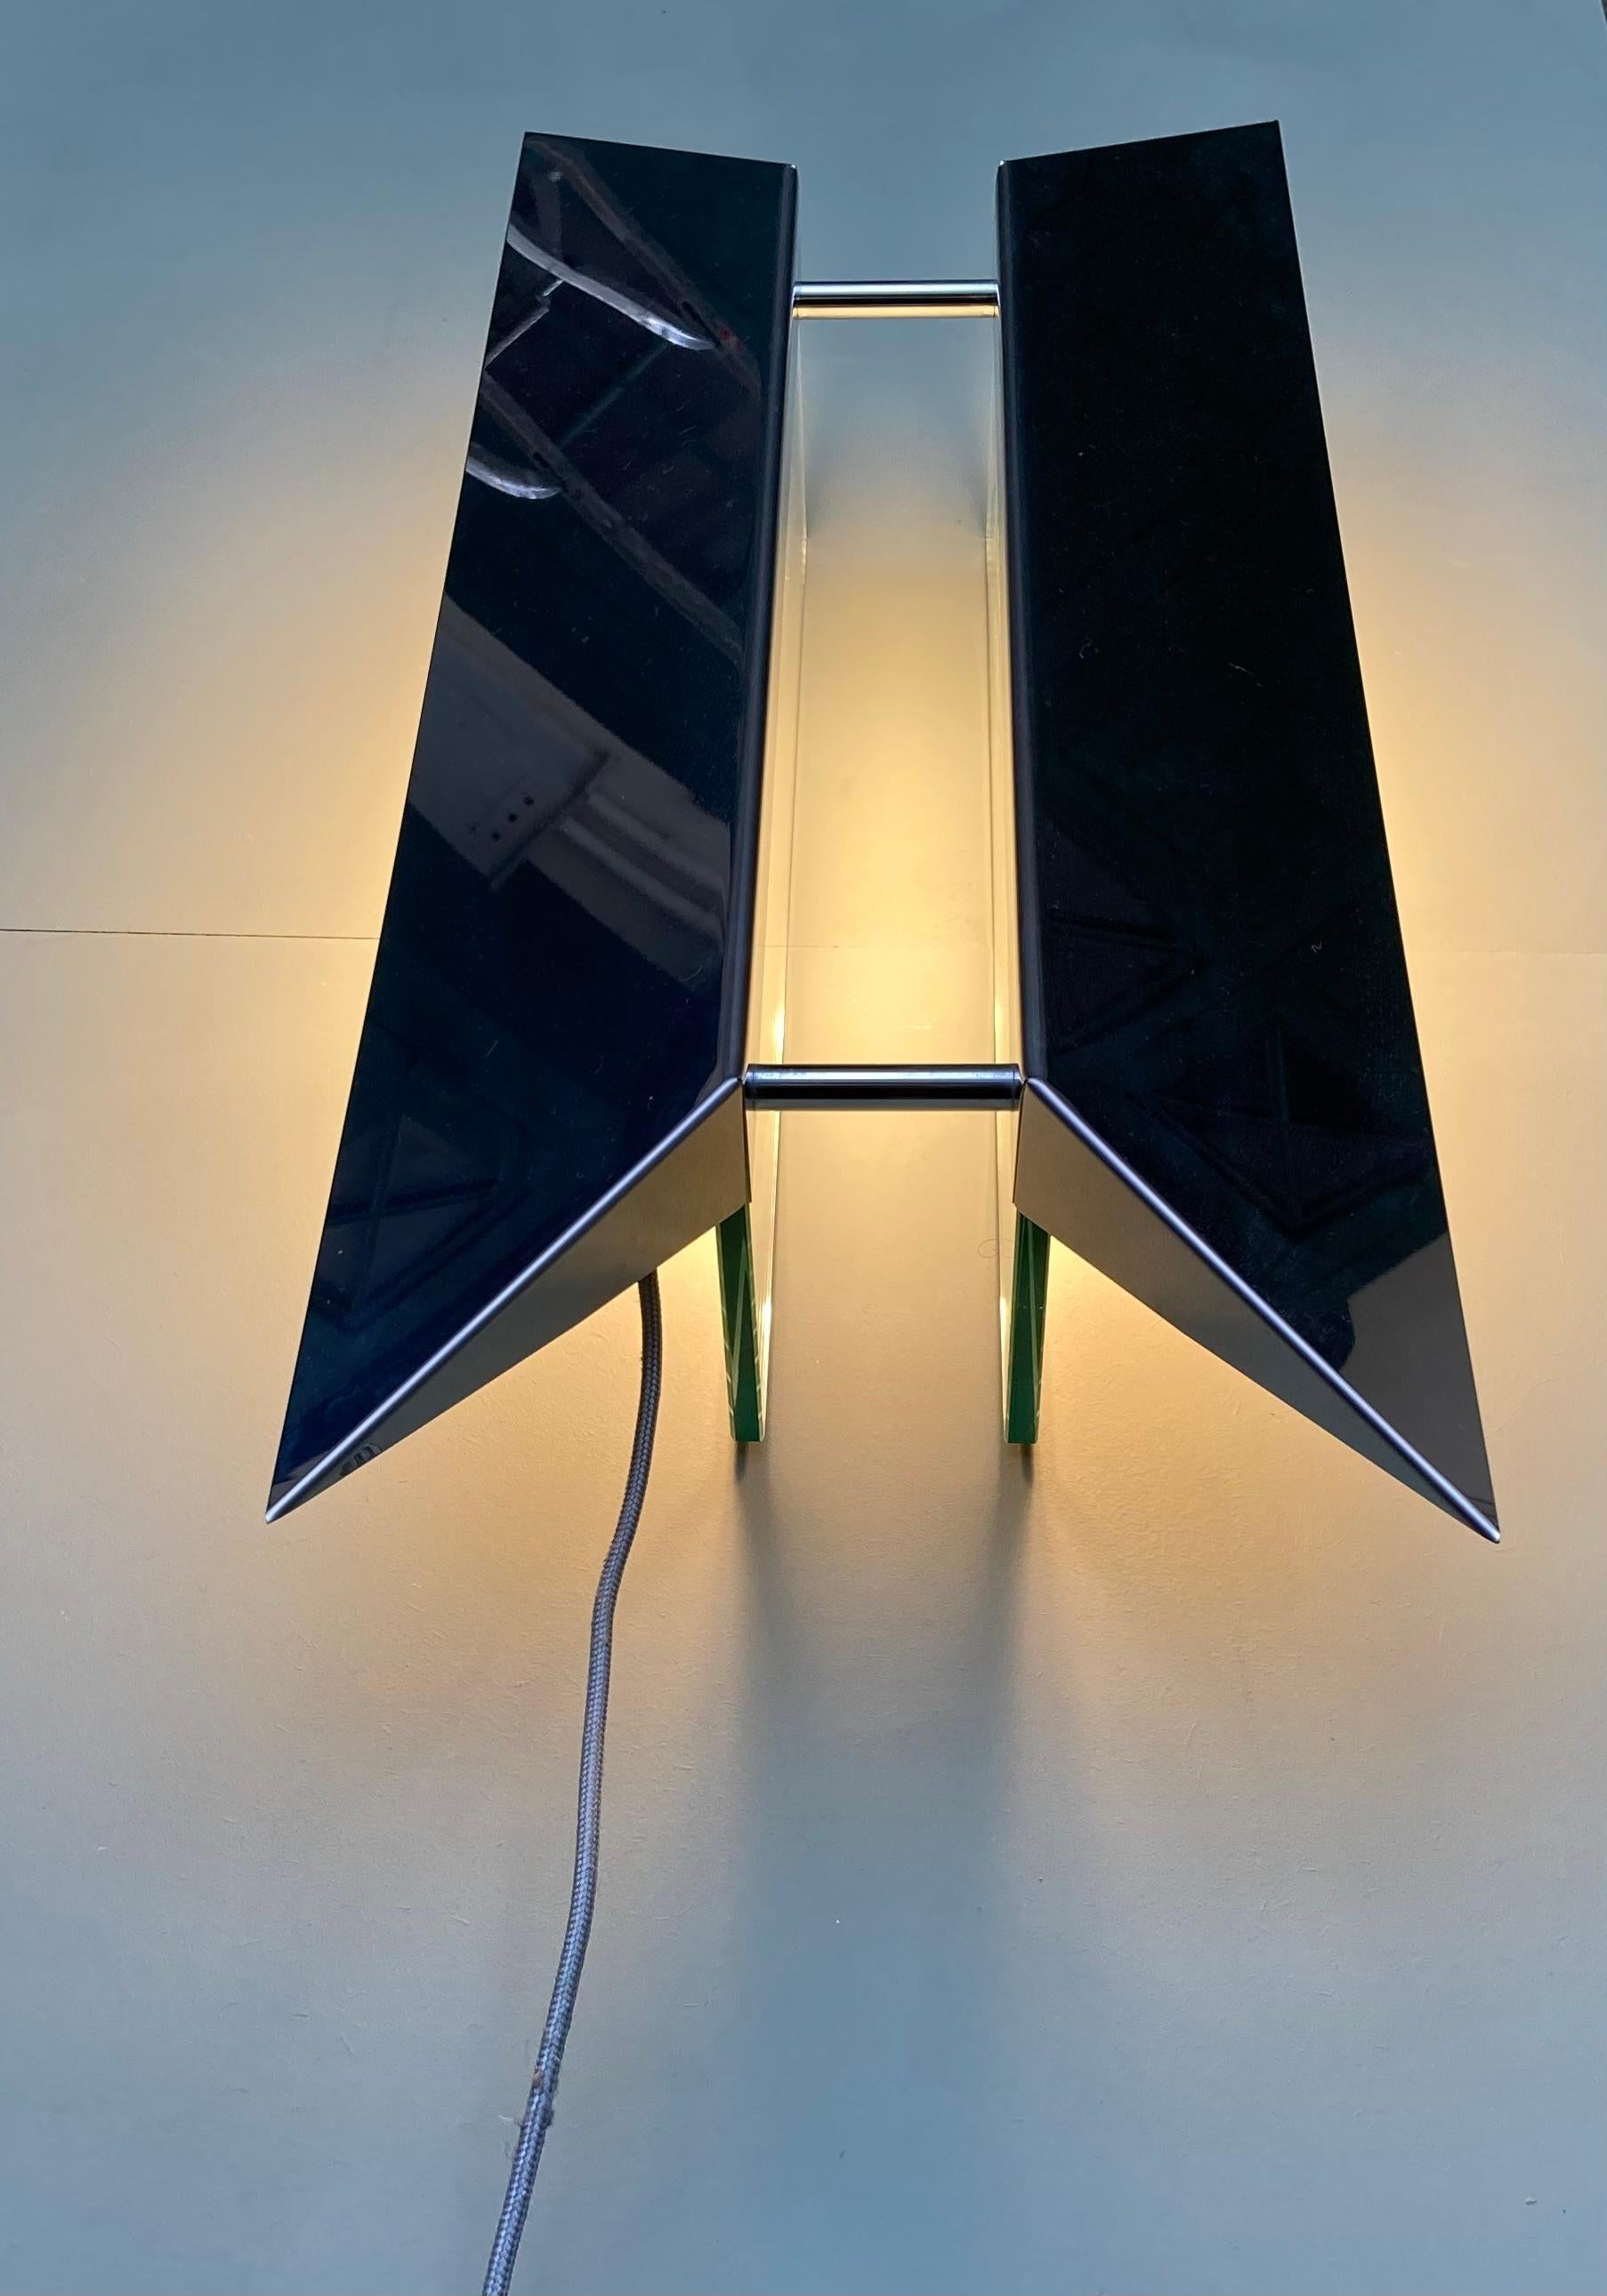 Lamp model Pietra by Gae Aulenti & Piero Castiglioni for Fontana Arte, creation 1988.
This large Table or Desk lamp holds on 2 thick blades of glass and is covered with a chromed metal blade.
The quality of the materials and its unusual shape make